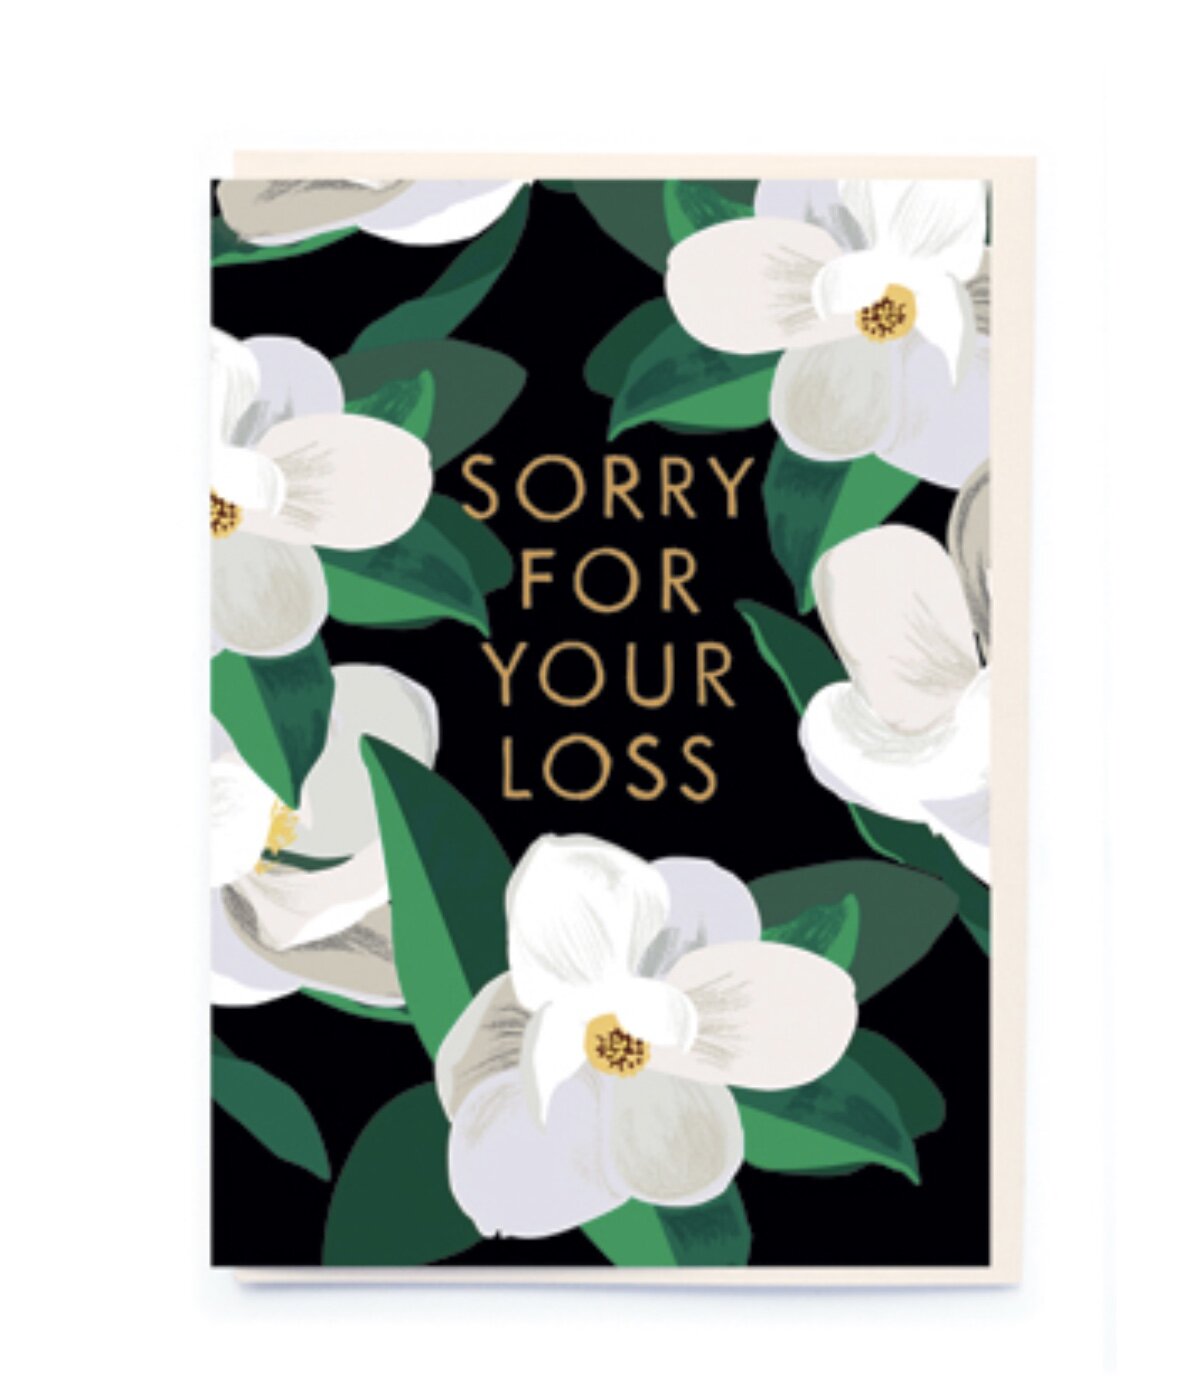 SORRY FOR YOUR LOSS | CARD BY NOI